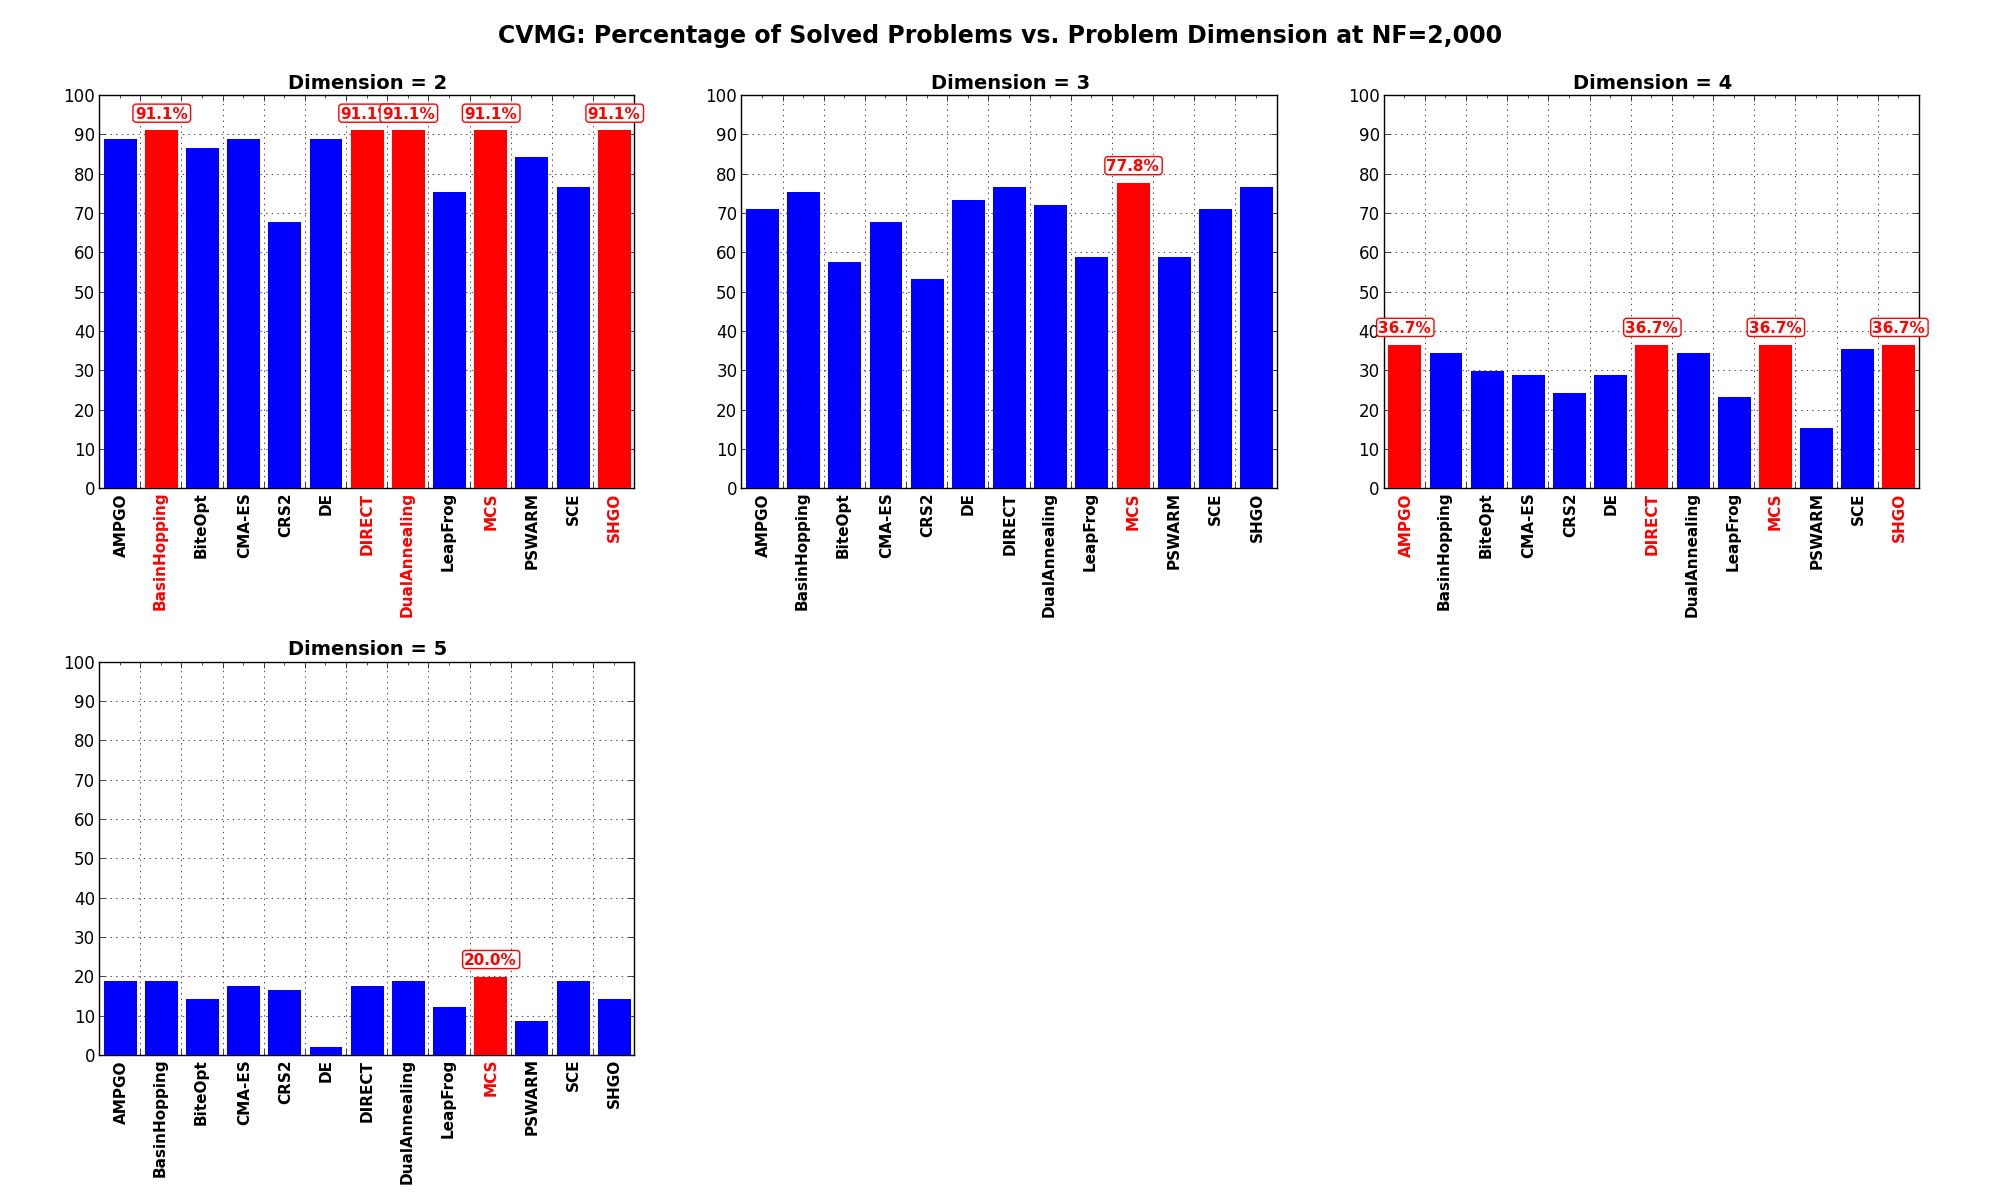 Percentage of problems solved as a function of problem dimension at :math:`NF = 2,000`